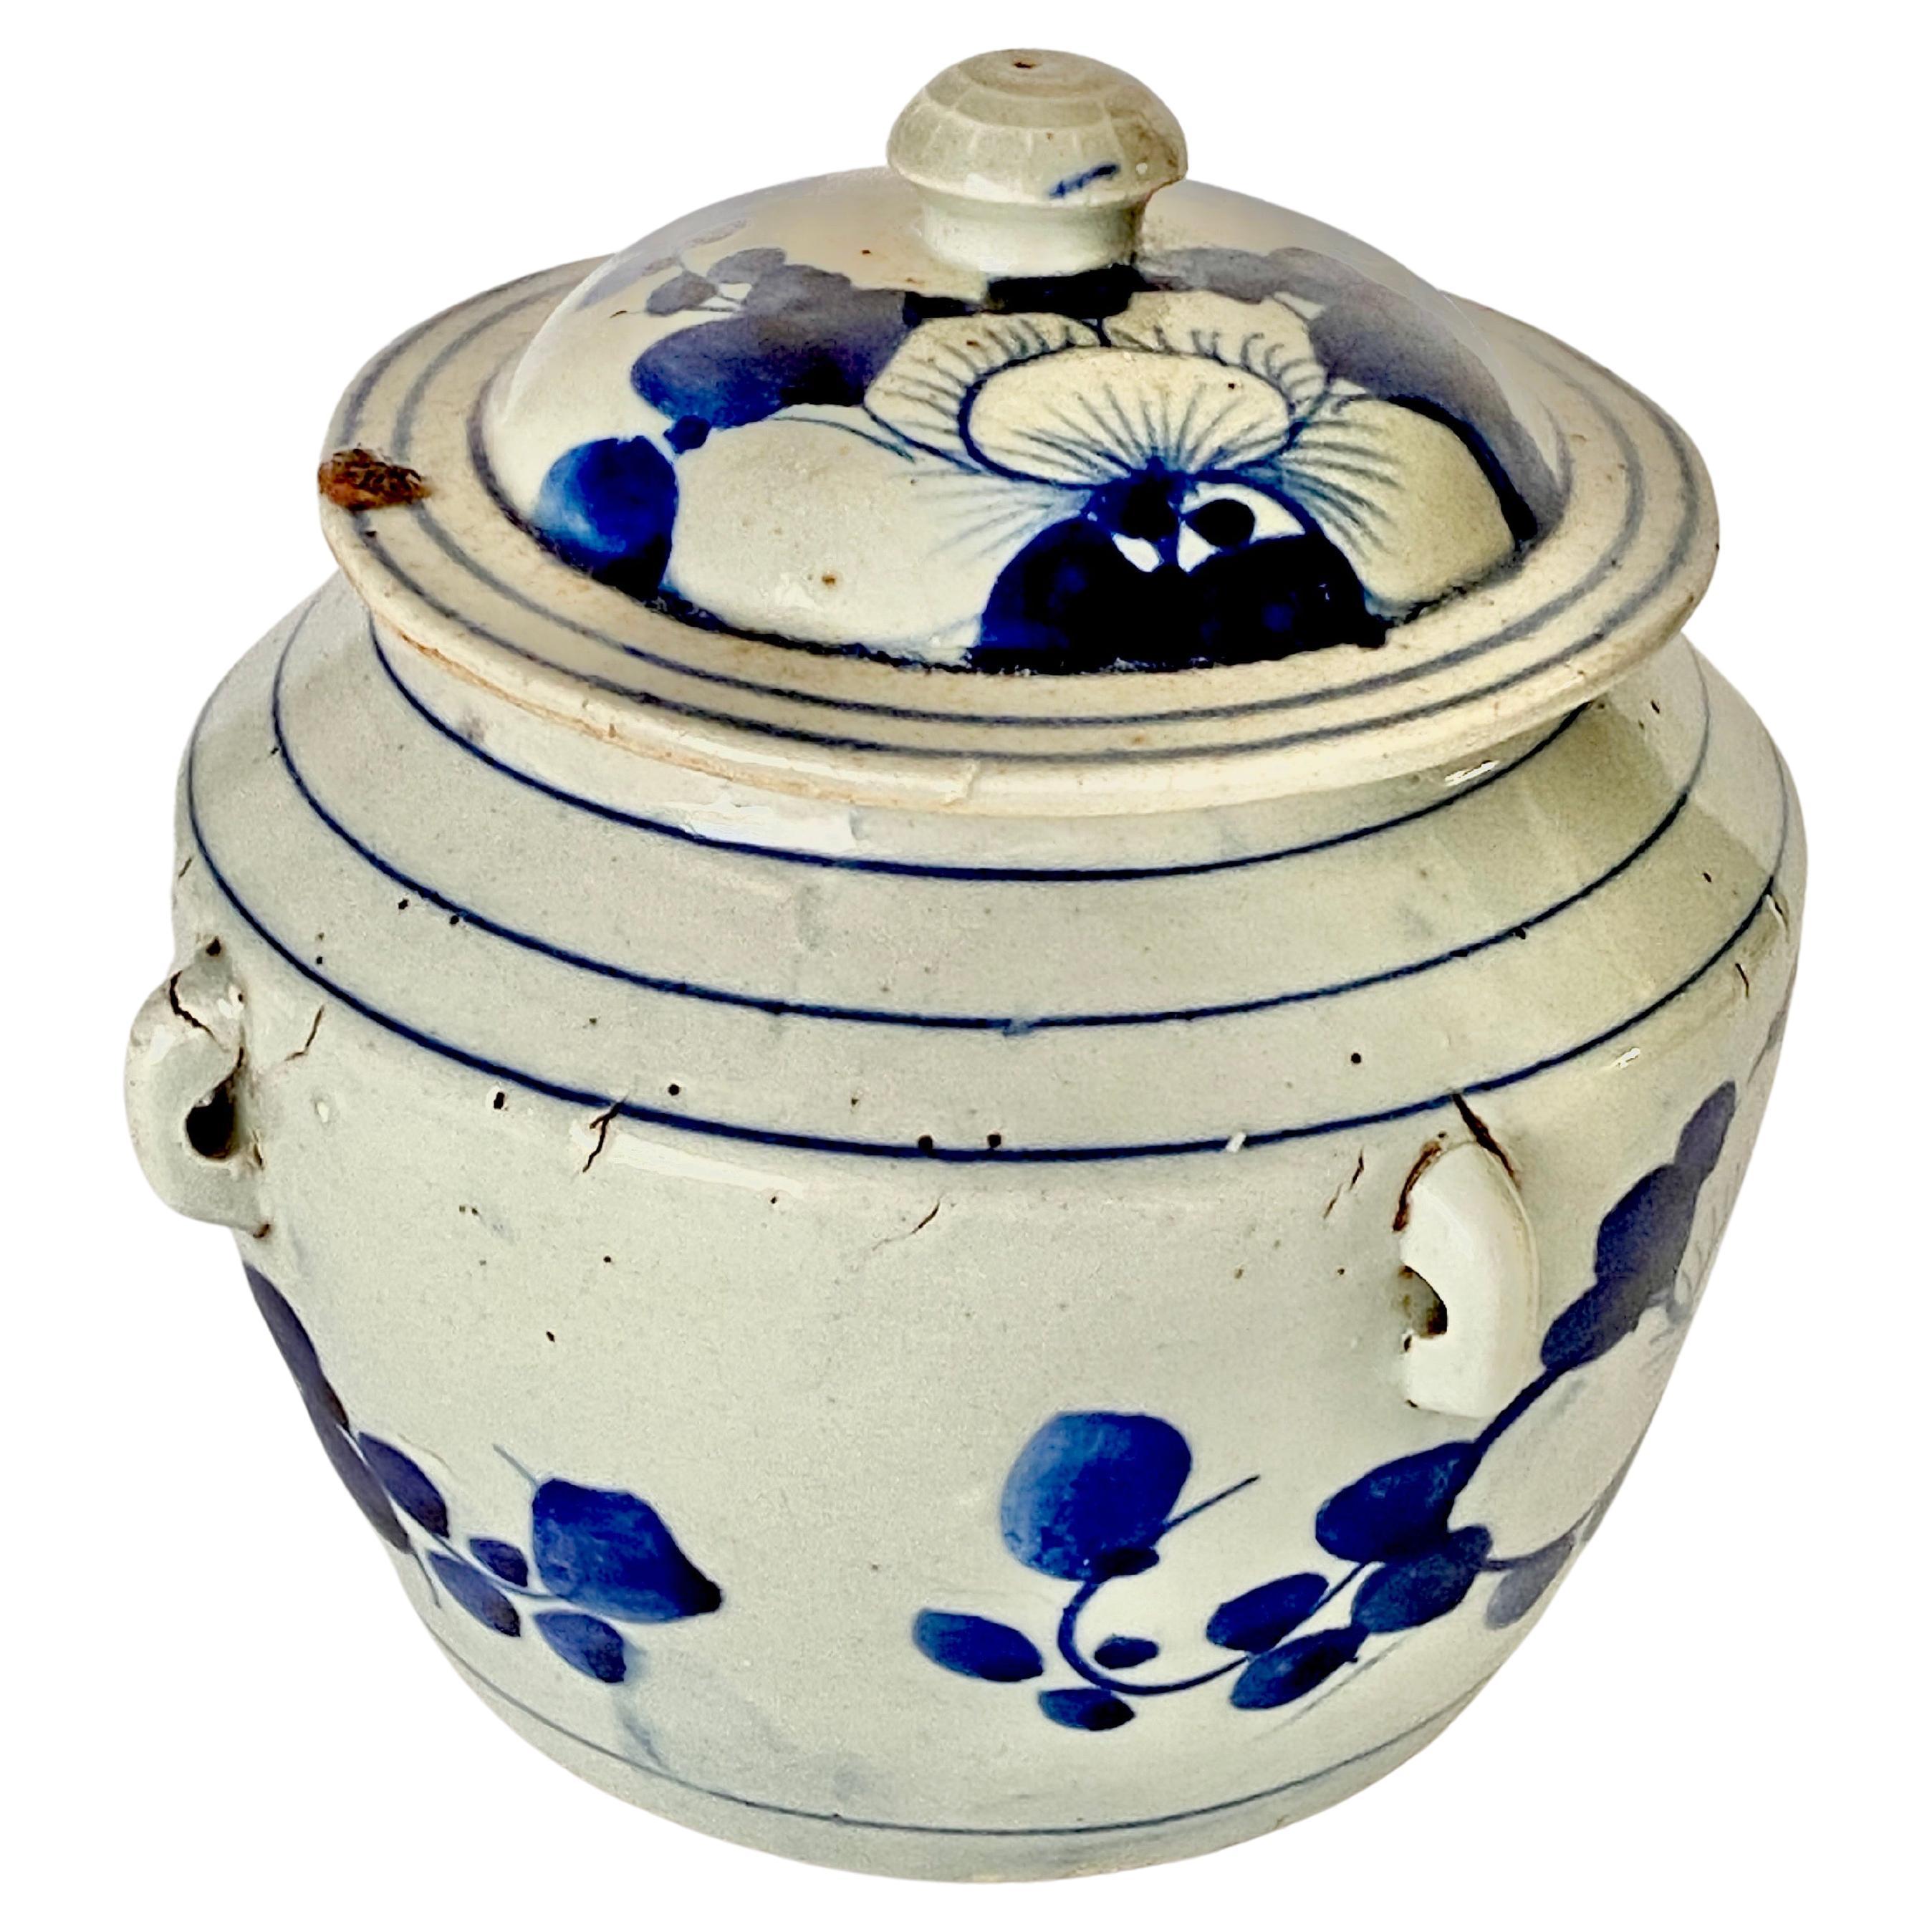 Delft Pot in Faïence, White and Blue, 17eme Century By  Jacobus Pynacker signed